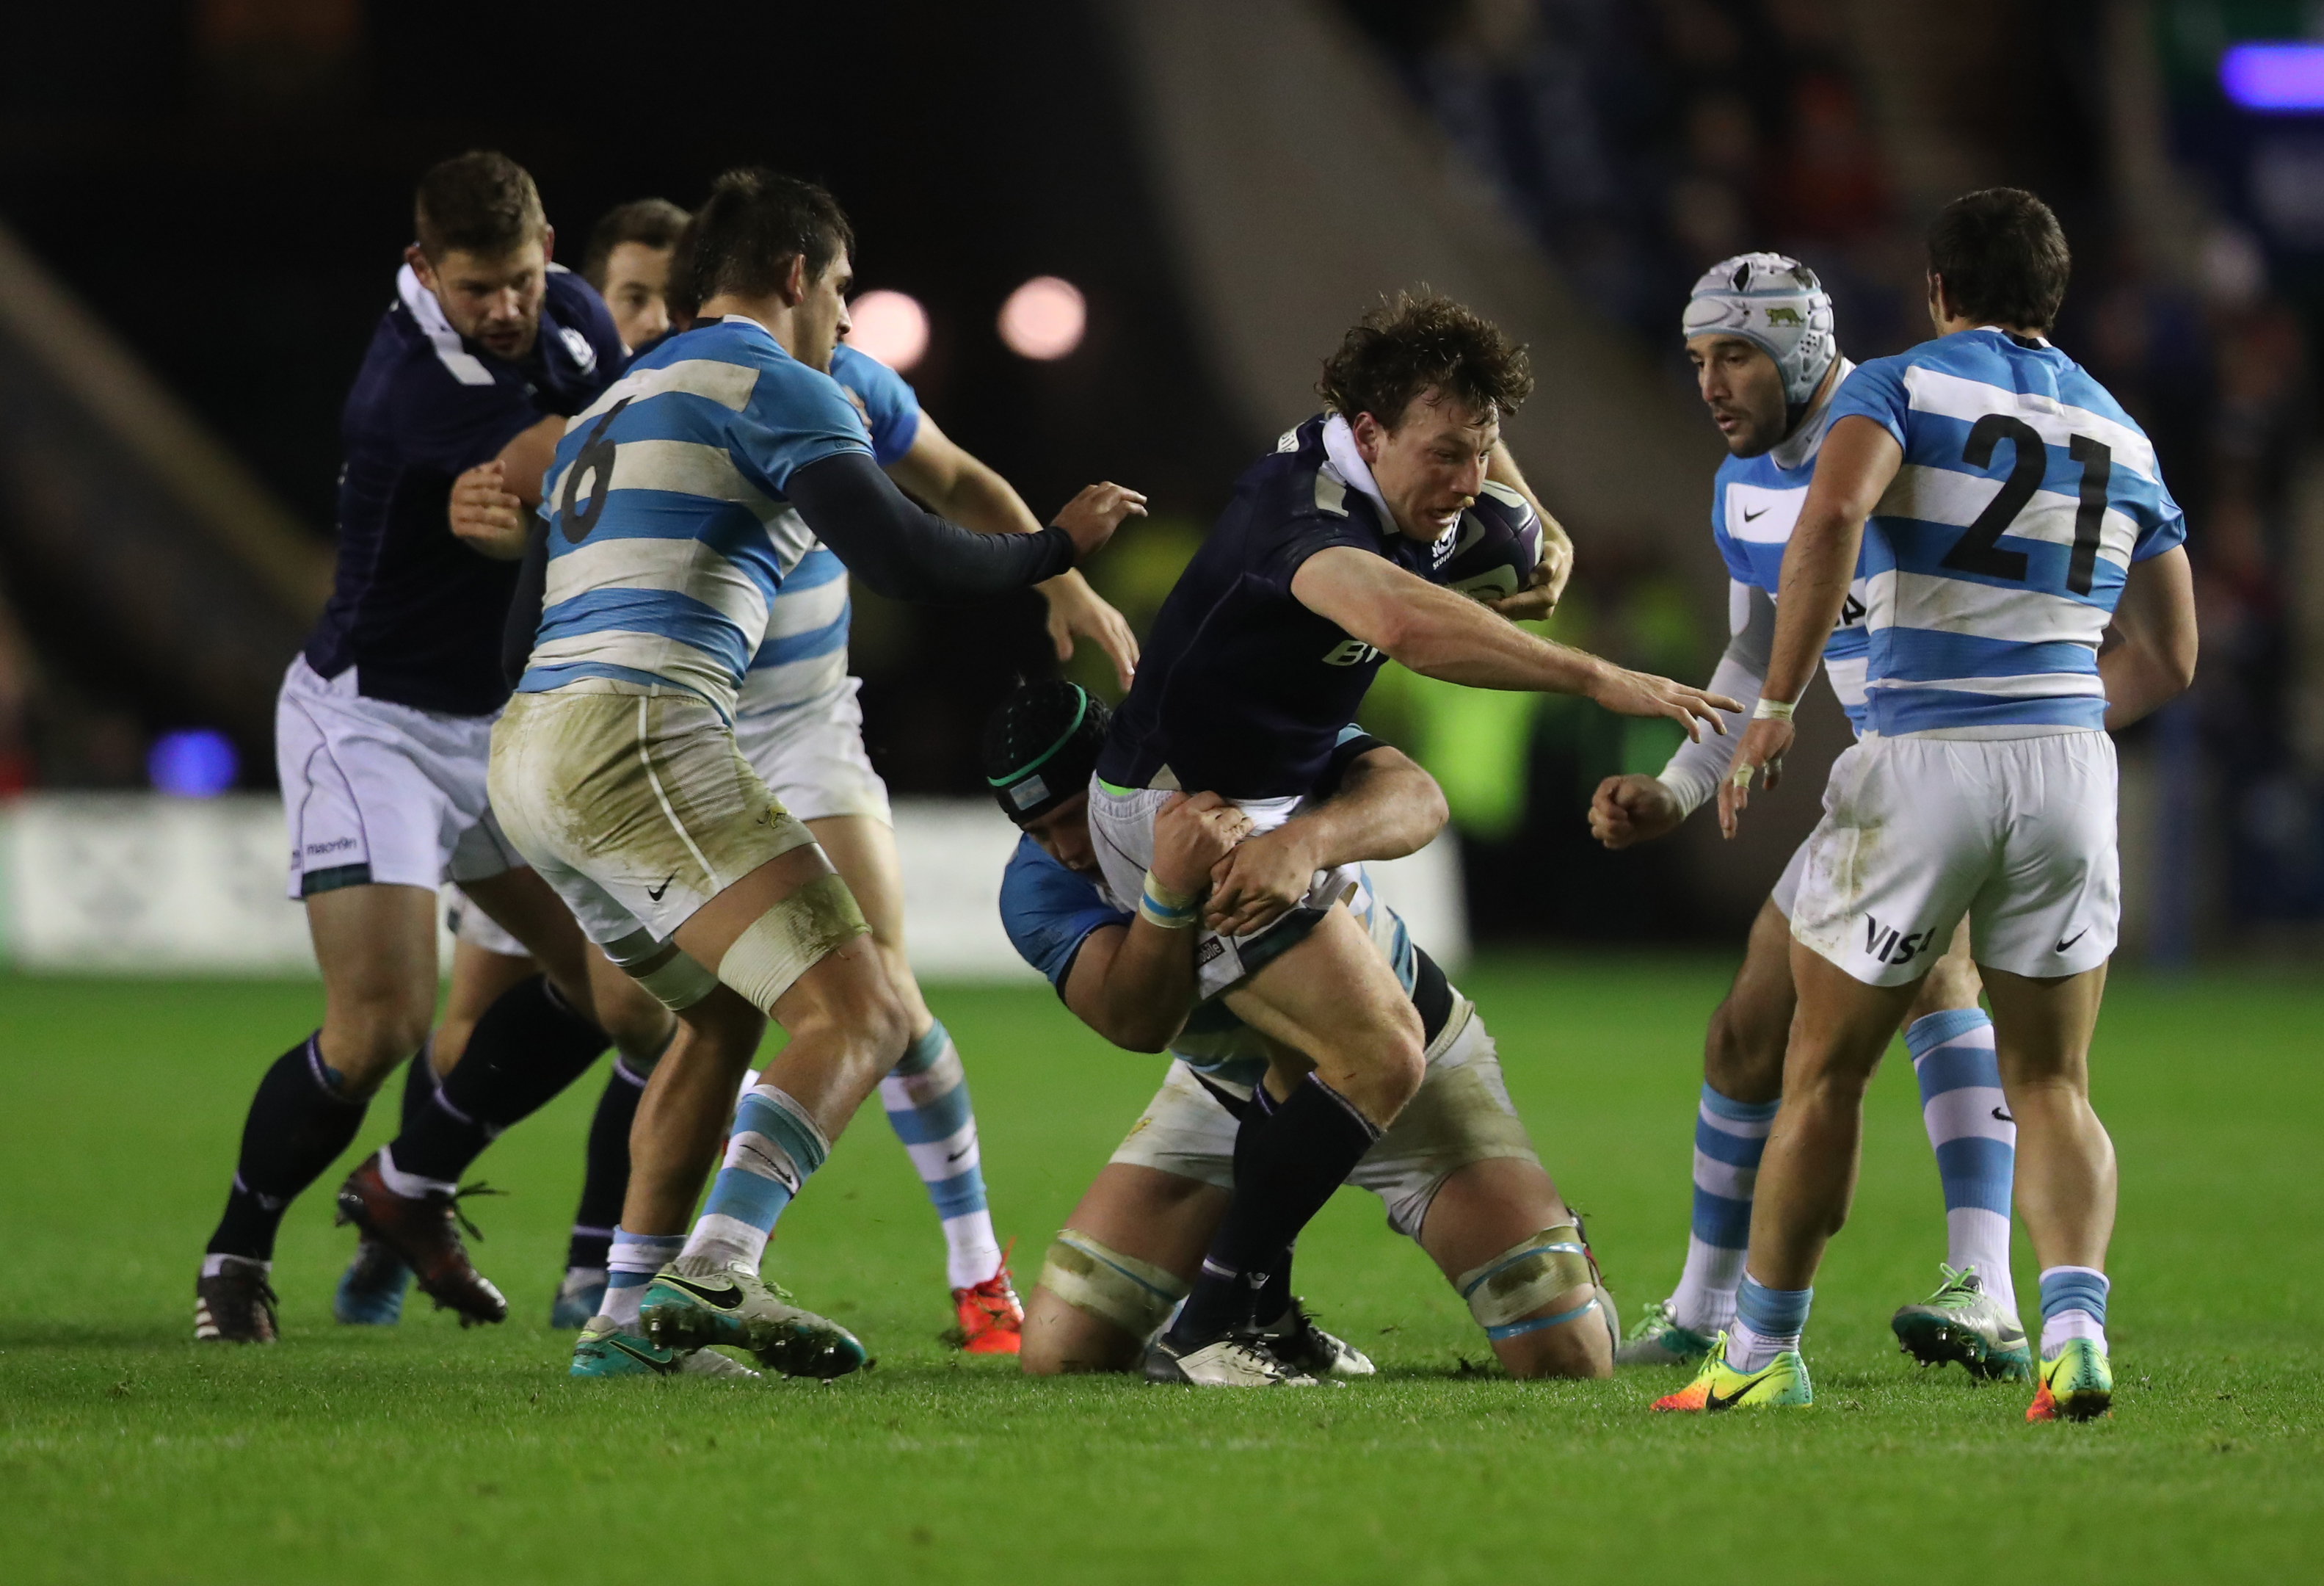 Hamish Watson on a typically powerful run for Scotland against Argentina.